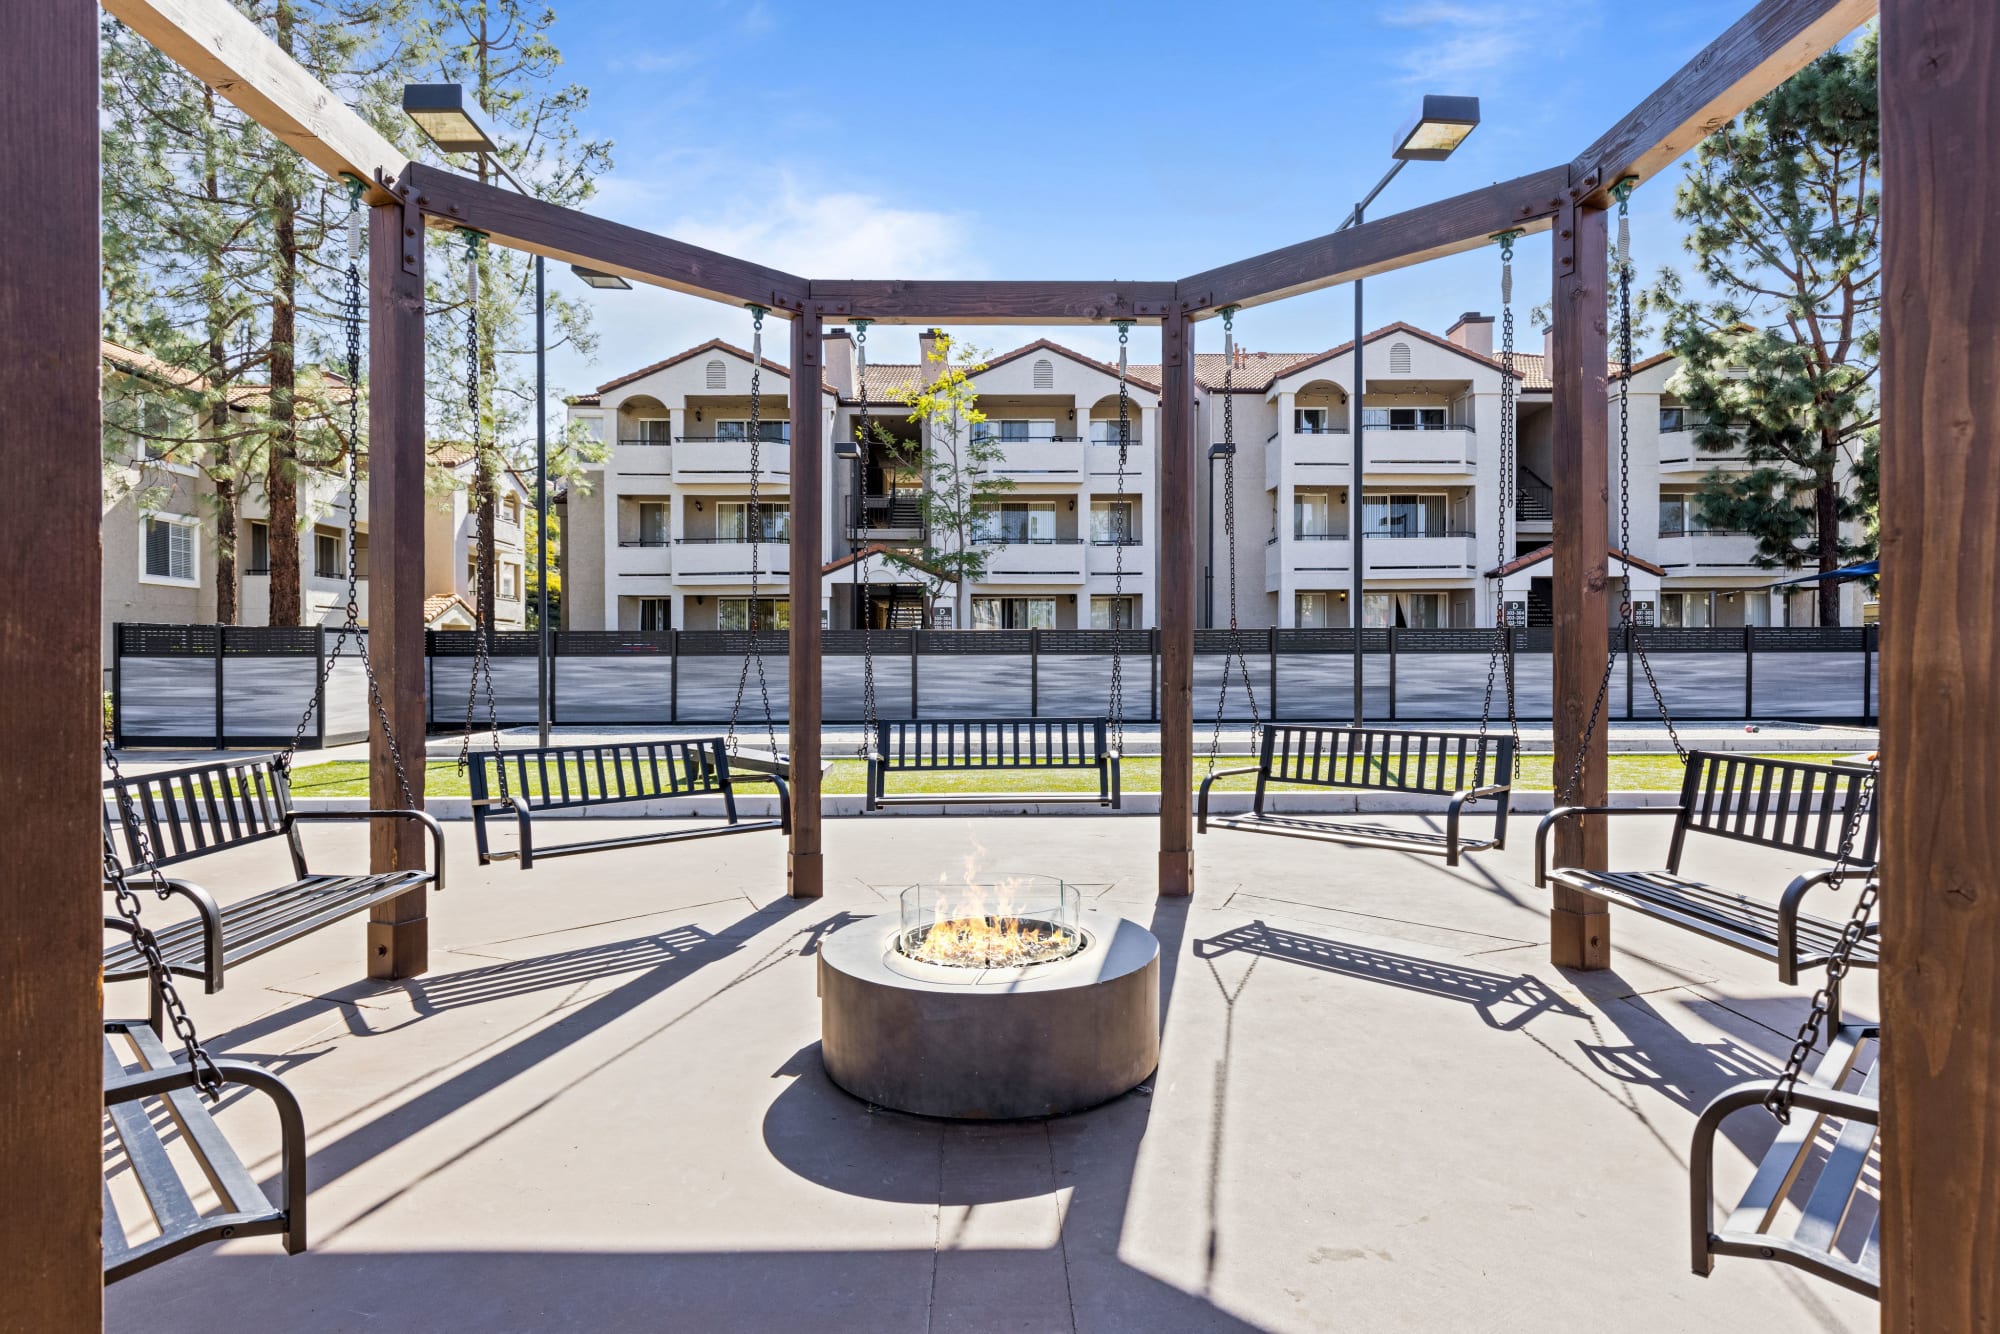 Fire pit surrounded by swing seating at Sierra Del Oro Apartments in Corona, California